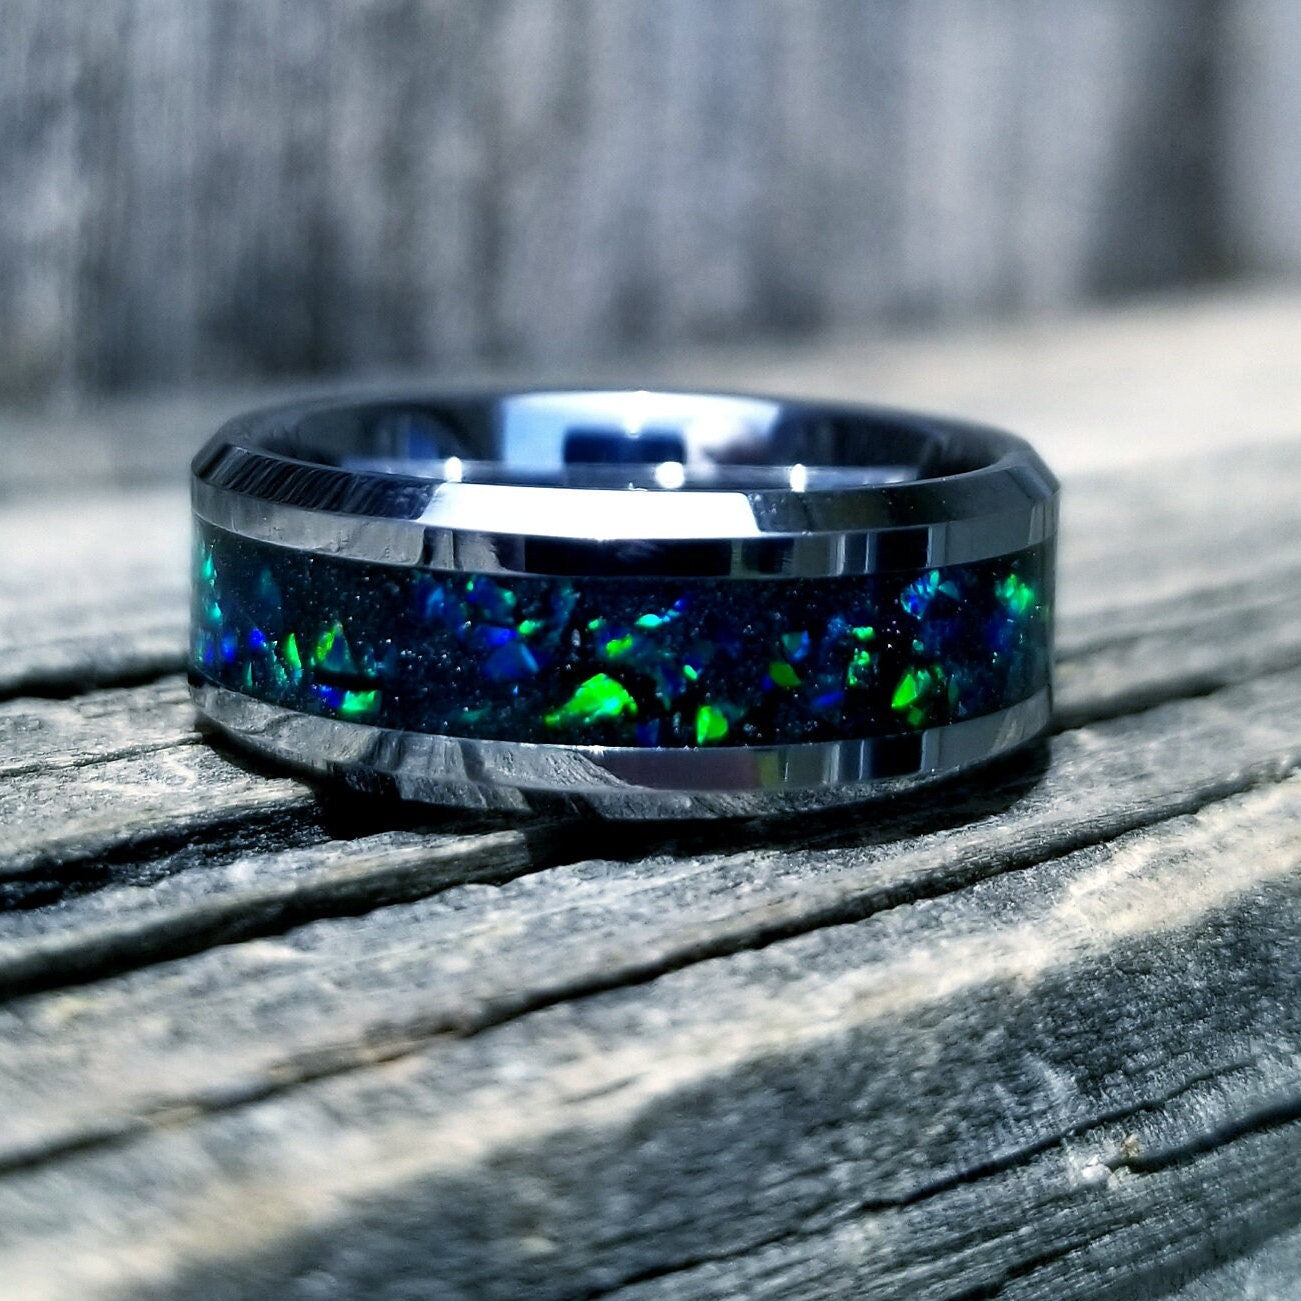 His & Hers Wedding Ring Set- Tungsten Carbide Ring Set with Green Fire Opal & Glowstone Inlay - 8mm & 6mm Rings - Sizes 5-13 - Orth Custom Rings